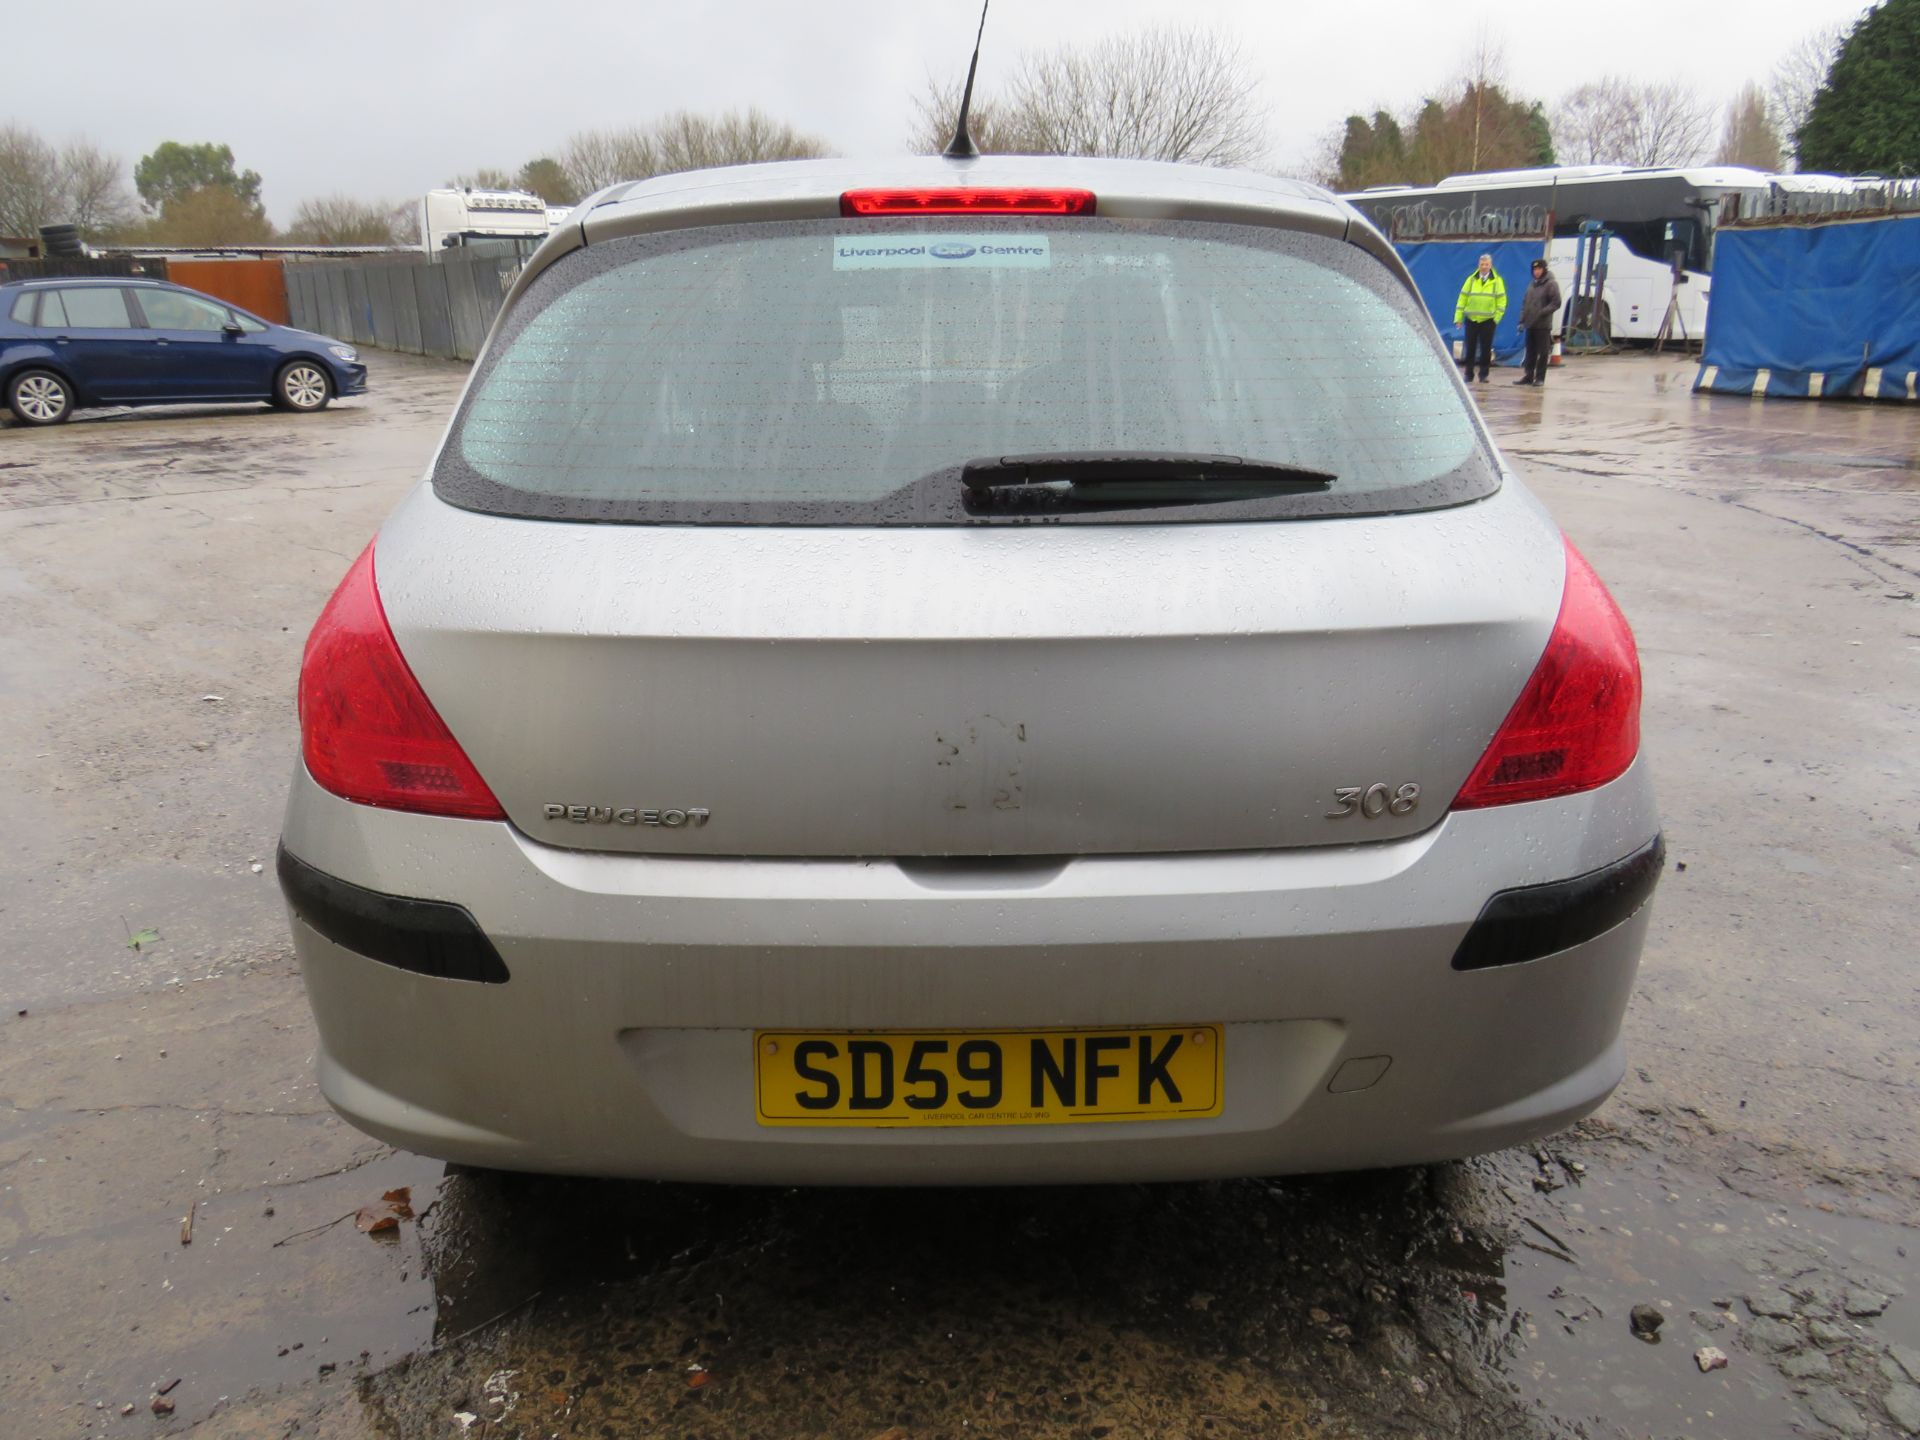 59 Plate Peugeot 308S 1.4 VTi, 60,554 miles (unchecked), MOT until Feb 2023, comes with V5 and - Image 3 of 12